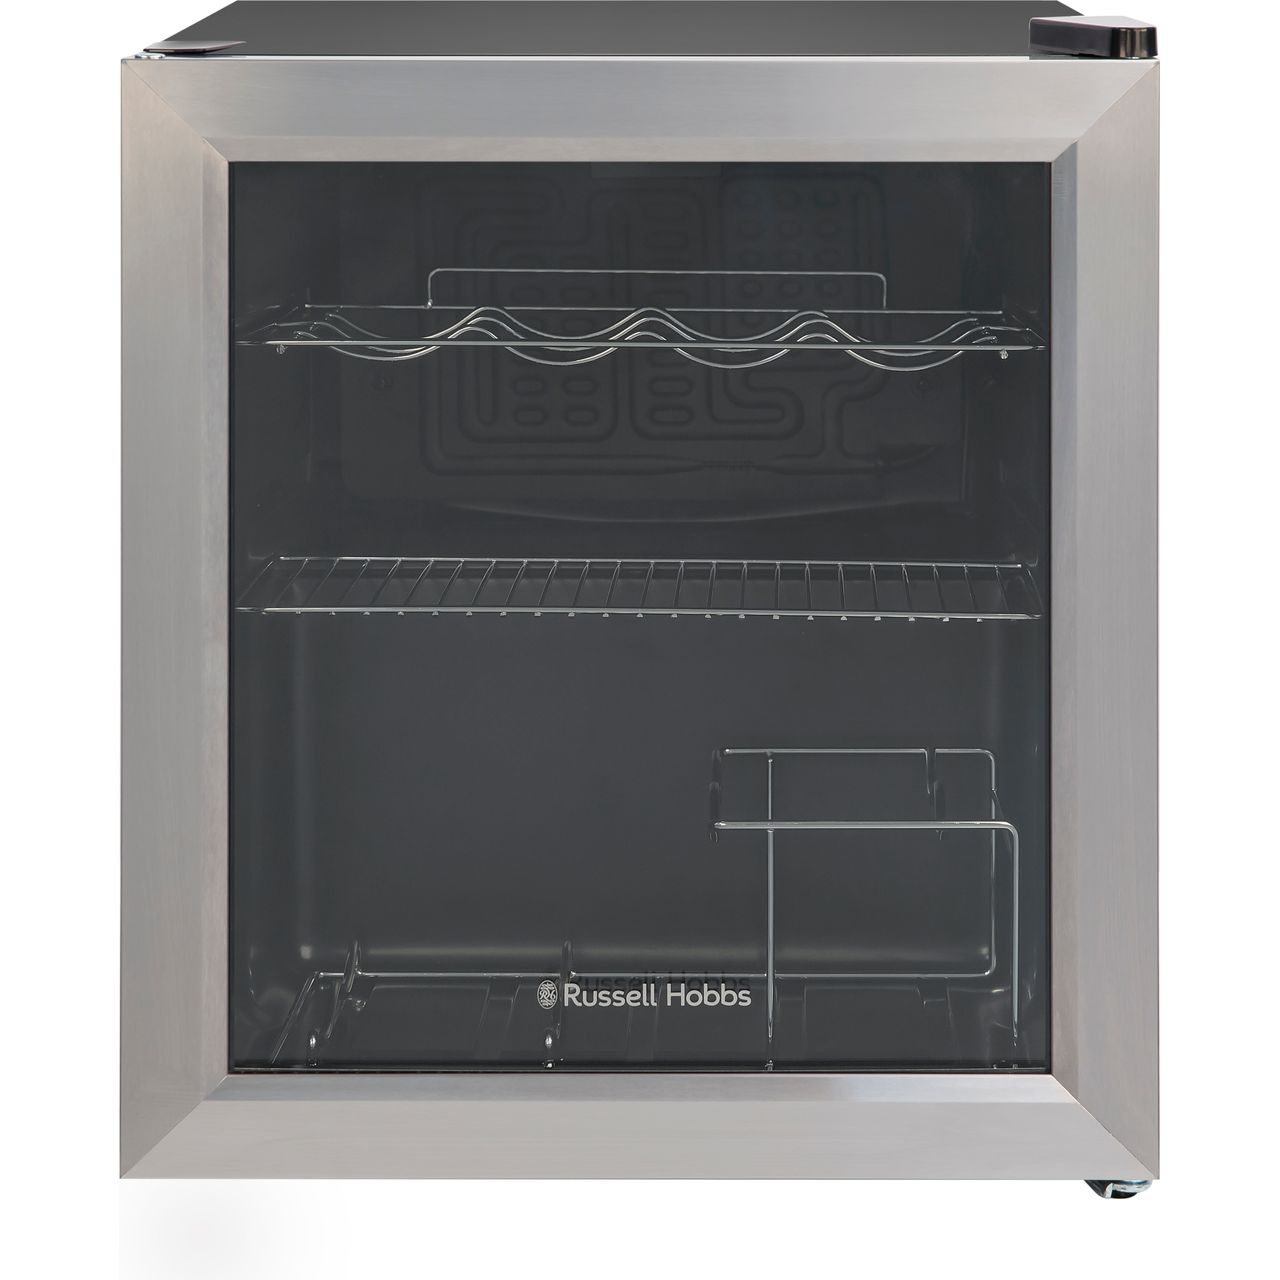 Russell Hobbs RHGWC3SS-C Wine Cooler Review